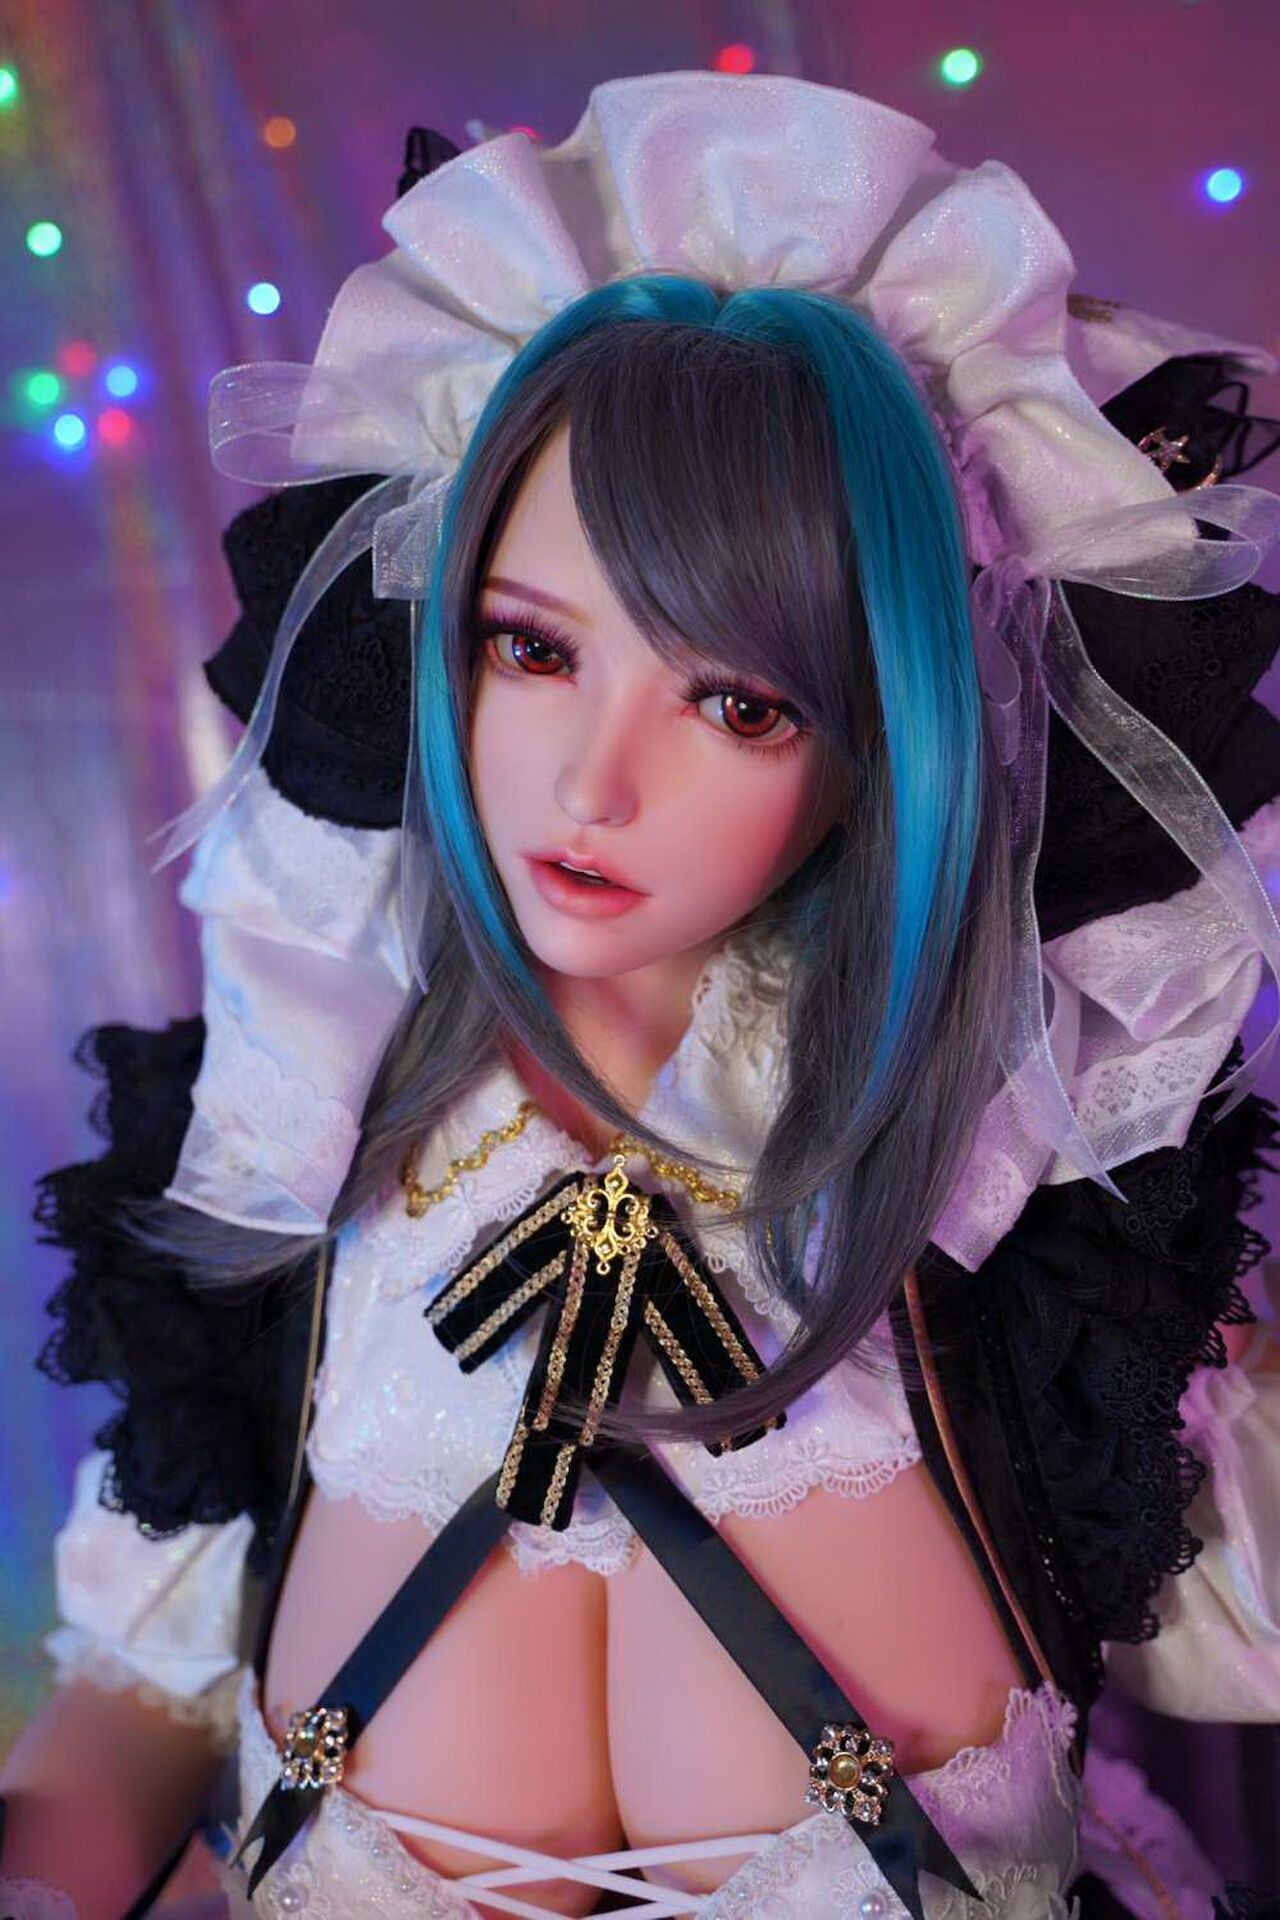 Peruana Meow Meow Meow, Your Personal Maid Cheshire Meow Cosplay Is Here !! By Little Pickled Cucumber @devil_sama8844 Bukkake Boys